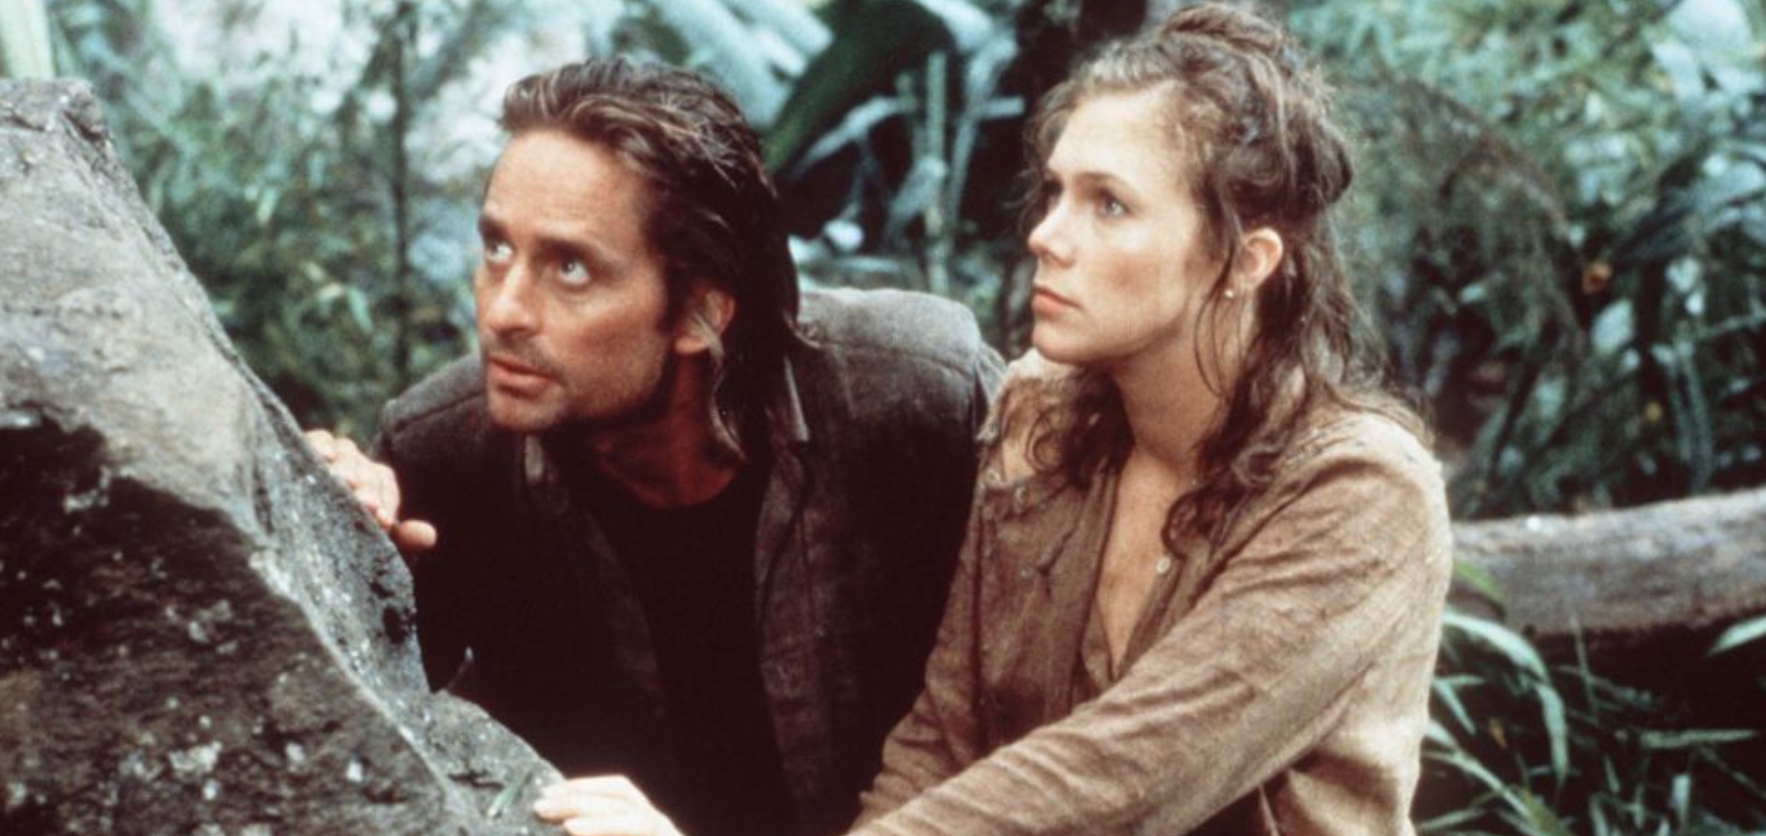 Romance Is Heavy In Romancing The Stone